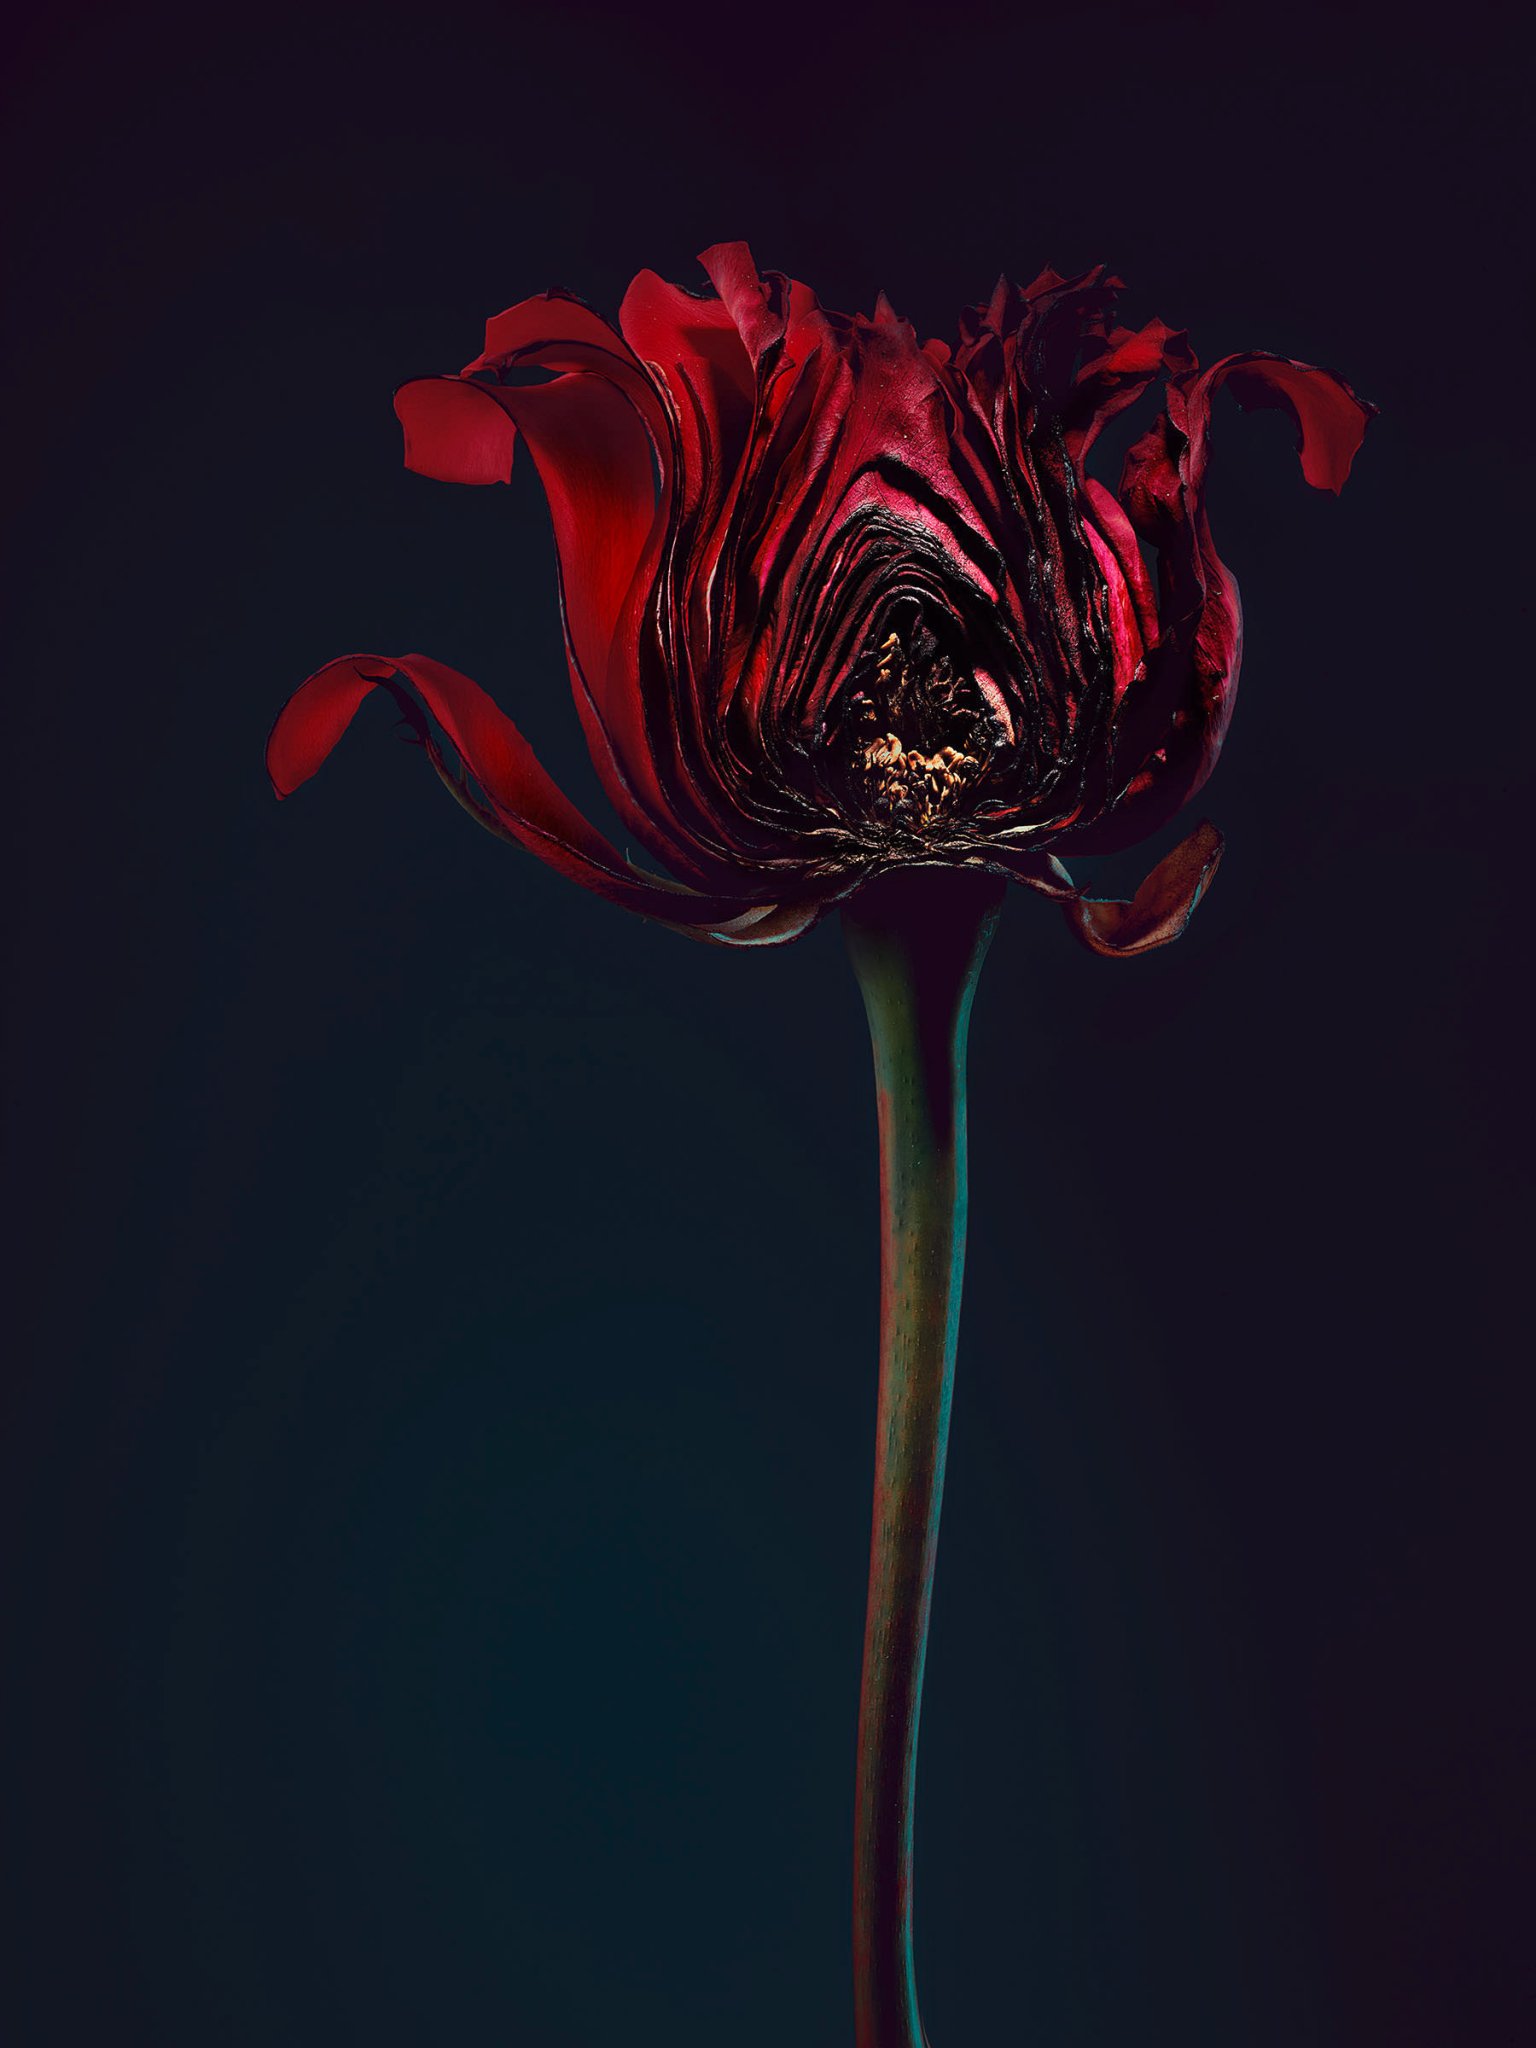 Simon Puschmann Uses Powerful Flower Analogy Inspired by "Me Too" Campaign